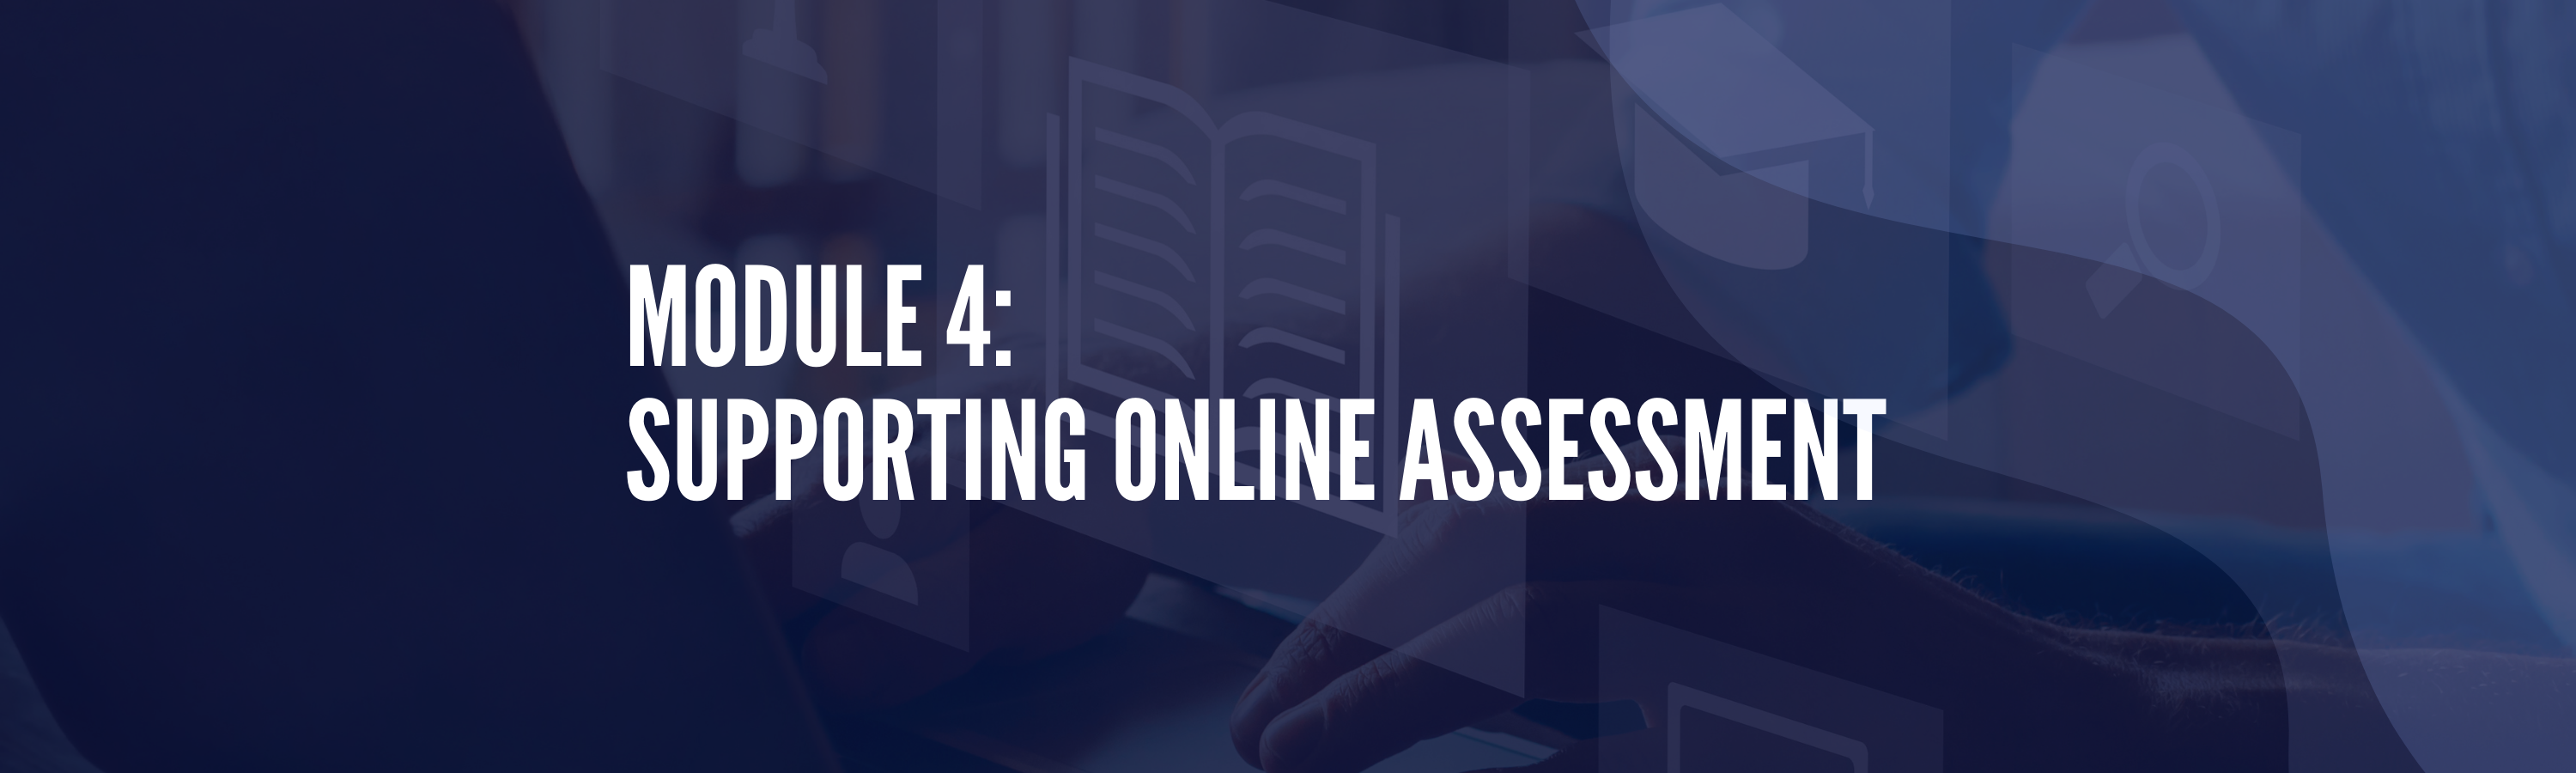 Module 4: Supporting Online Assessment banner